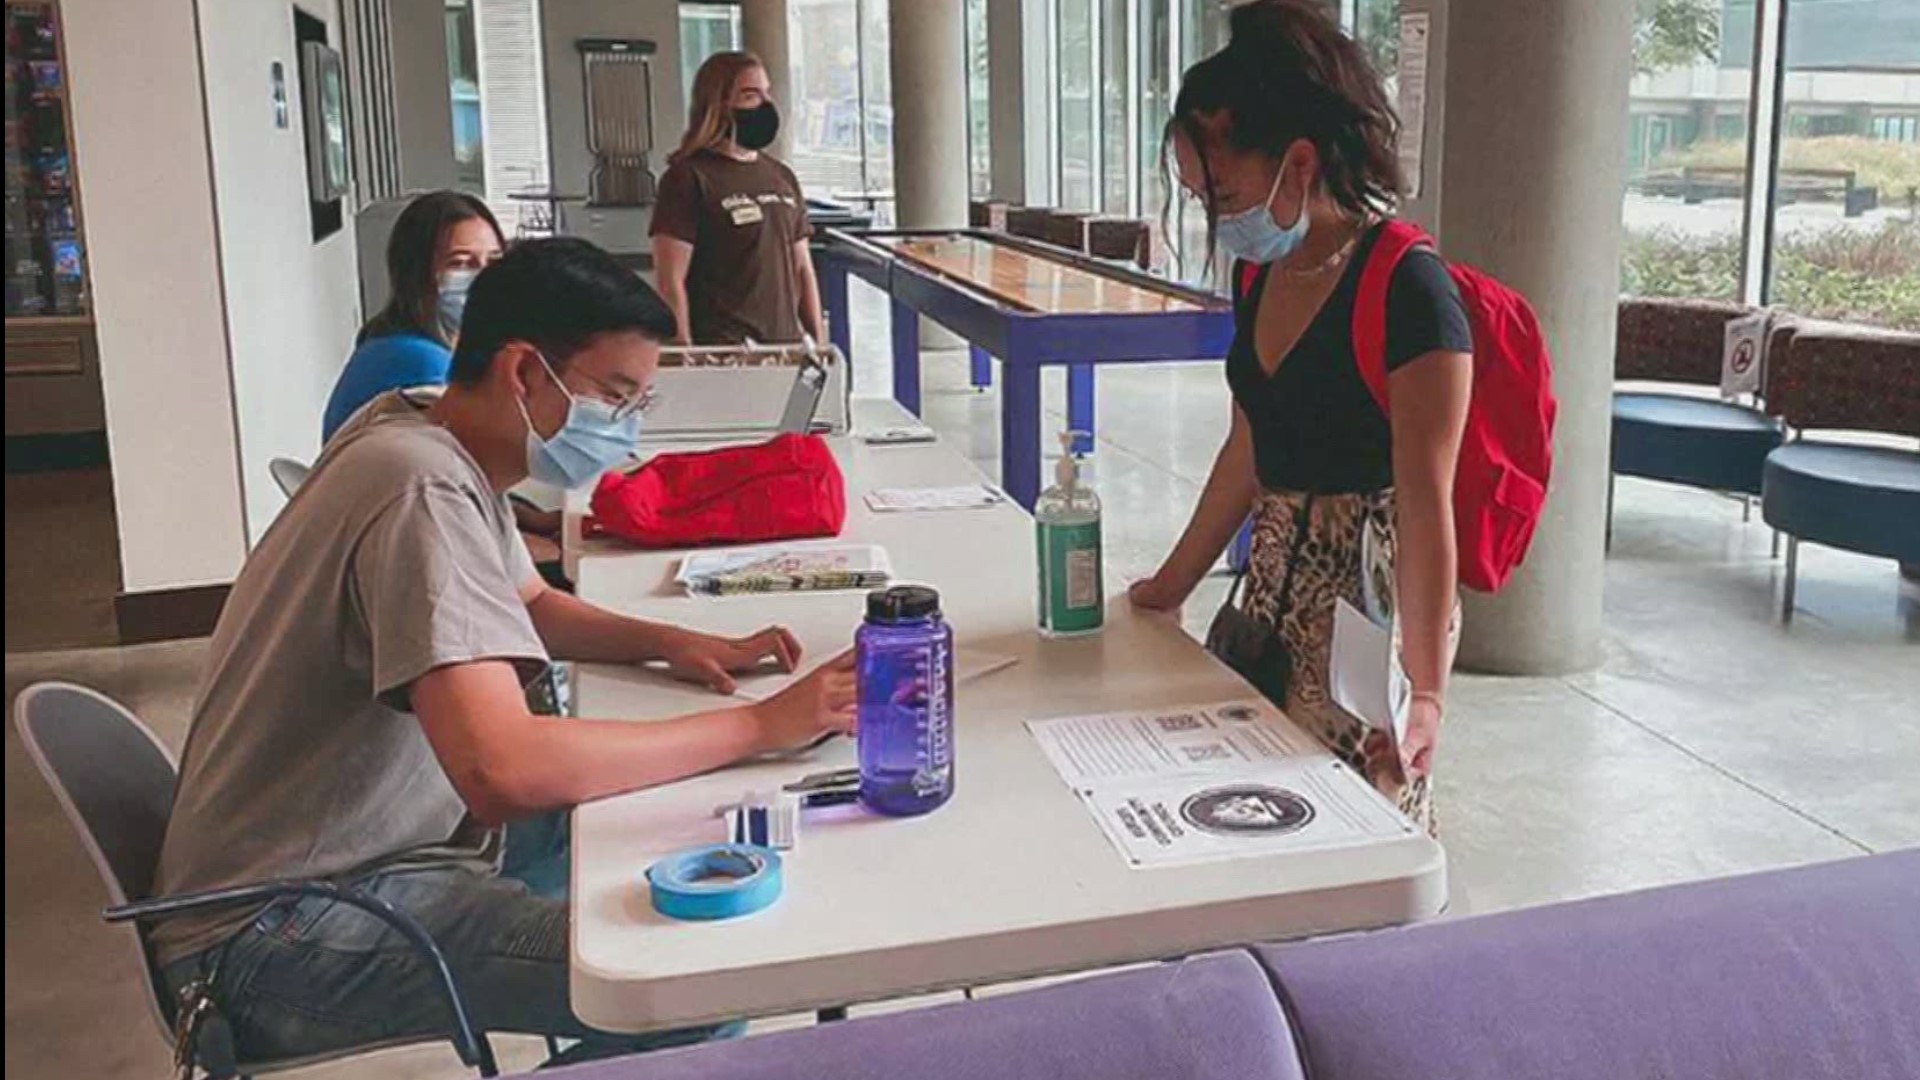 Thousands of students will move in at the University of Washington campus on Tuesday and the university is strongly encouraging them all to take a coronavirus test.